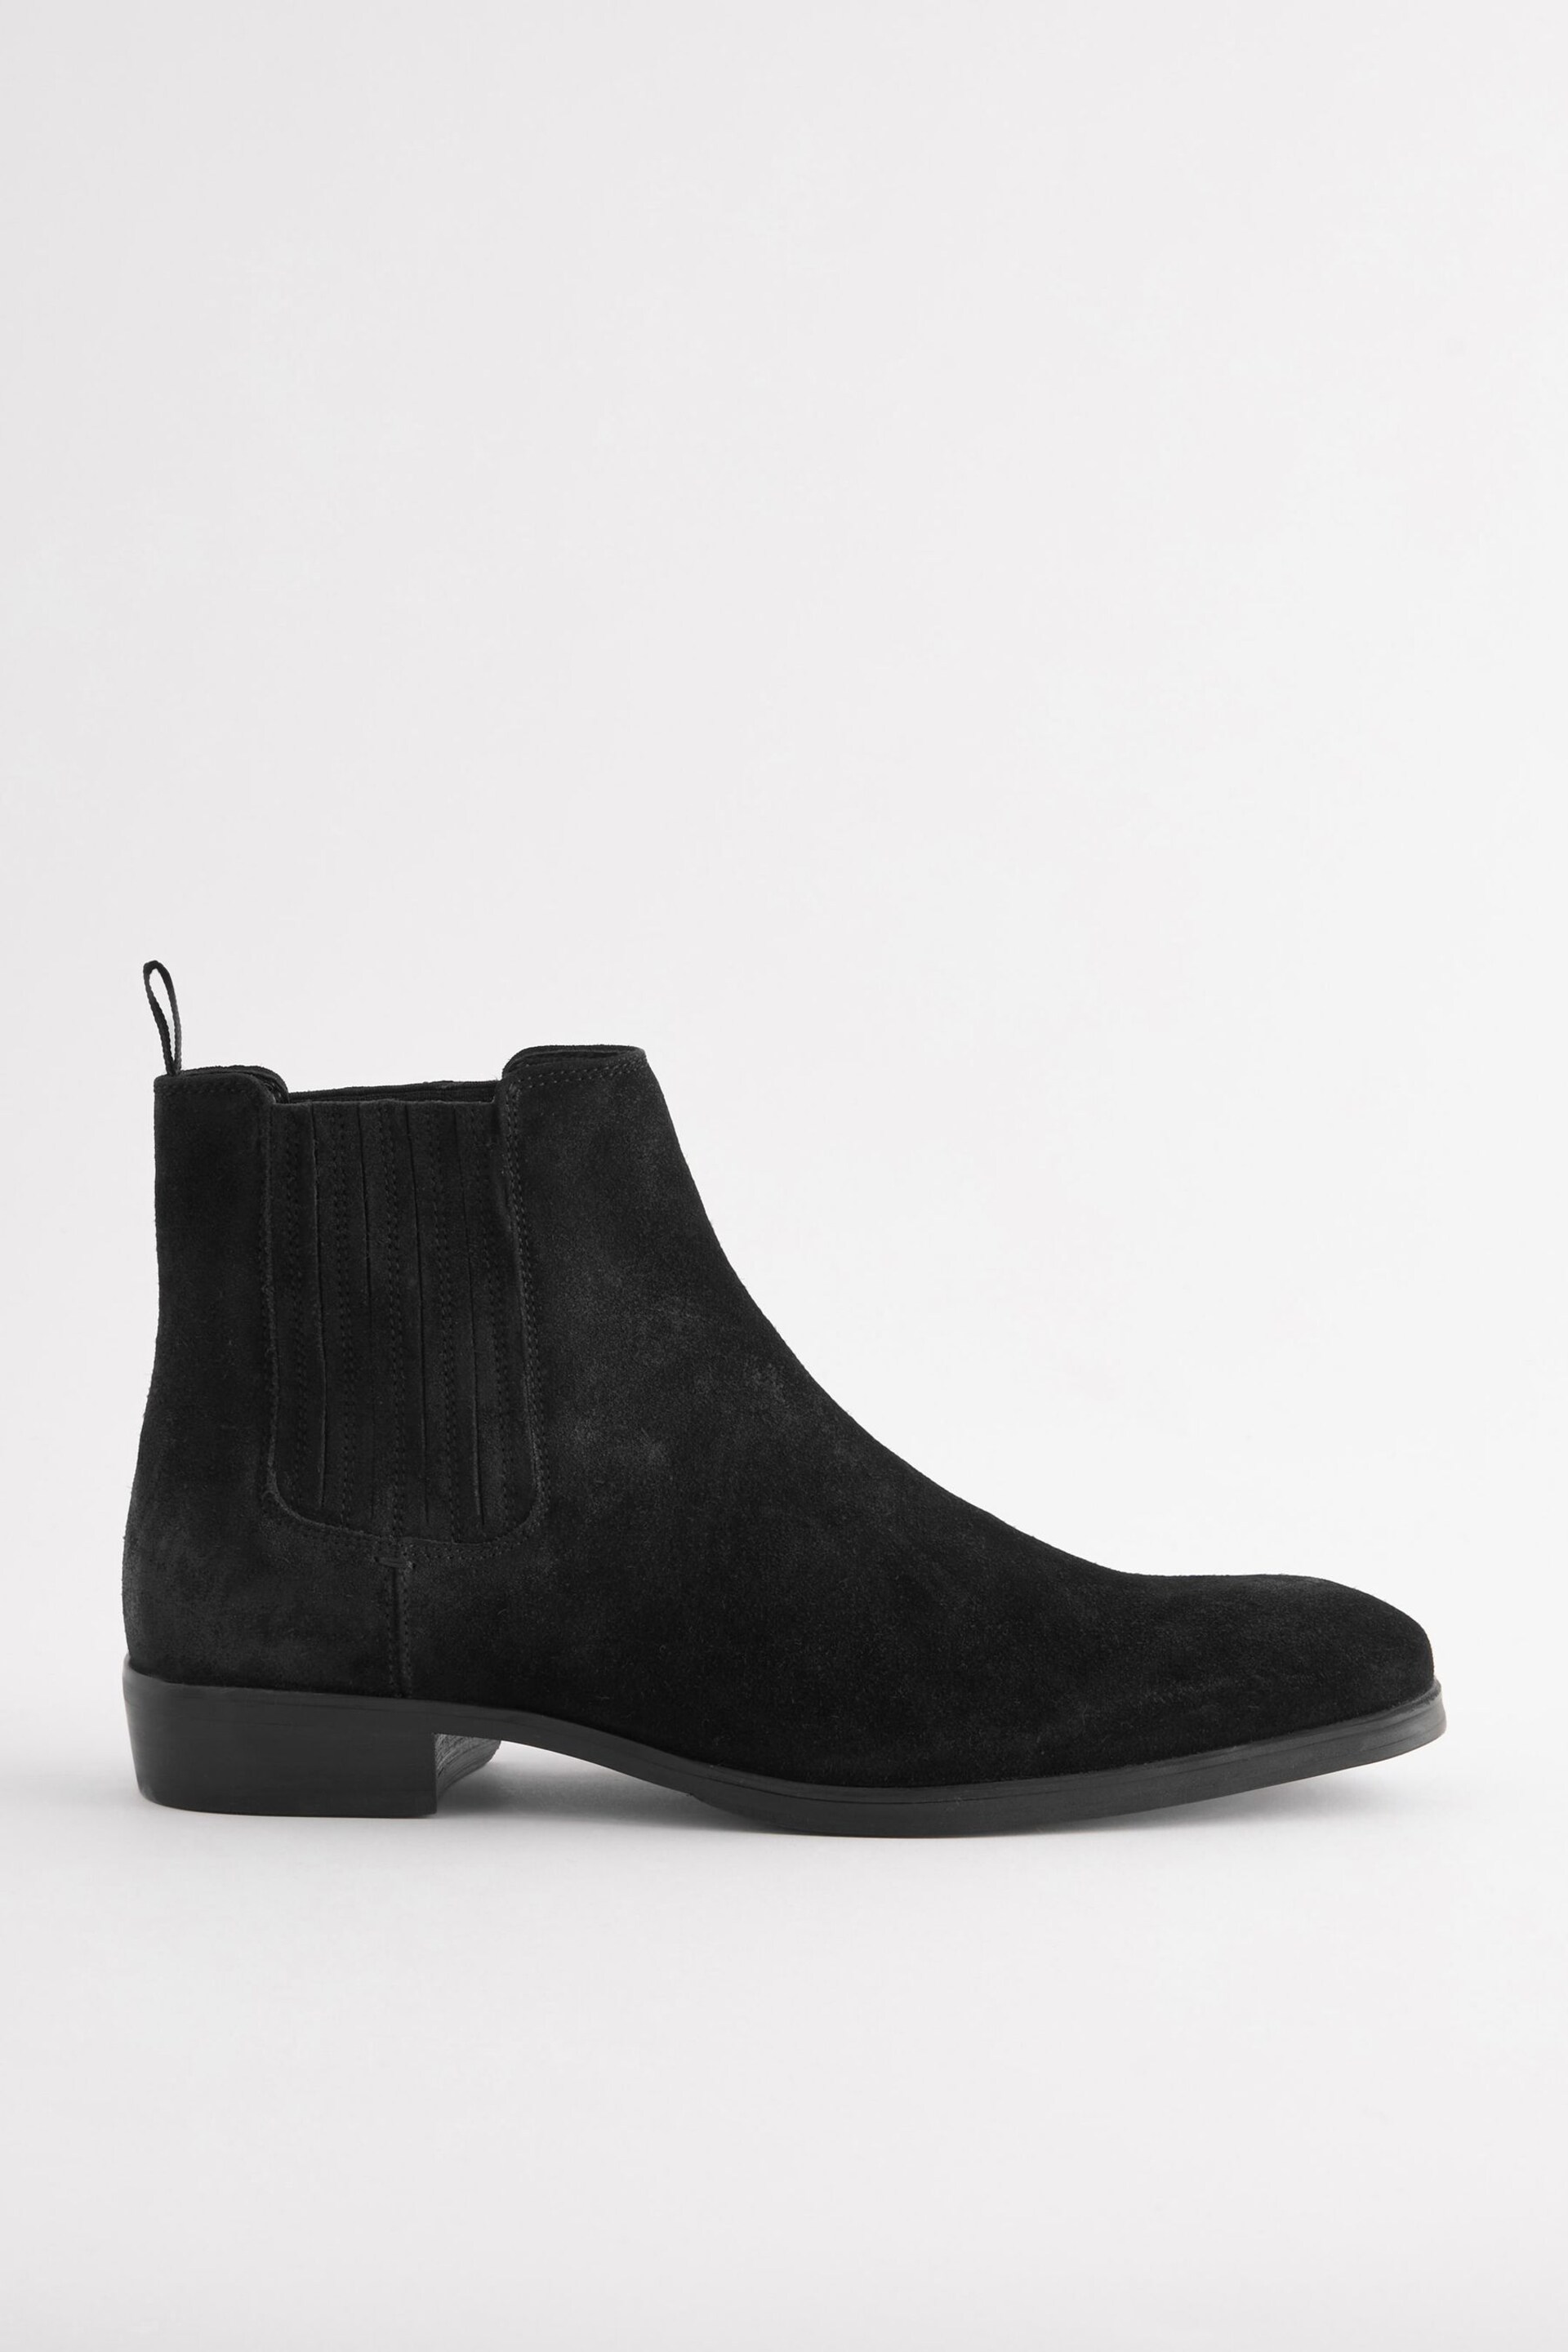 Black Suede Chelsea Boots - Image 2 of 6